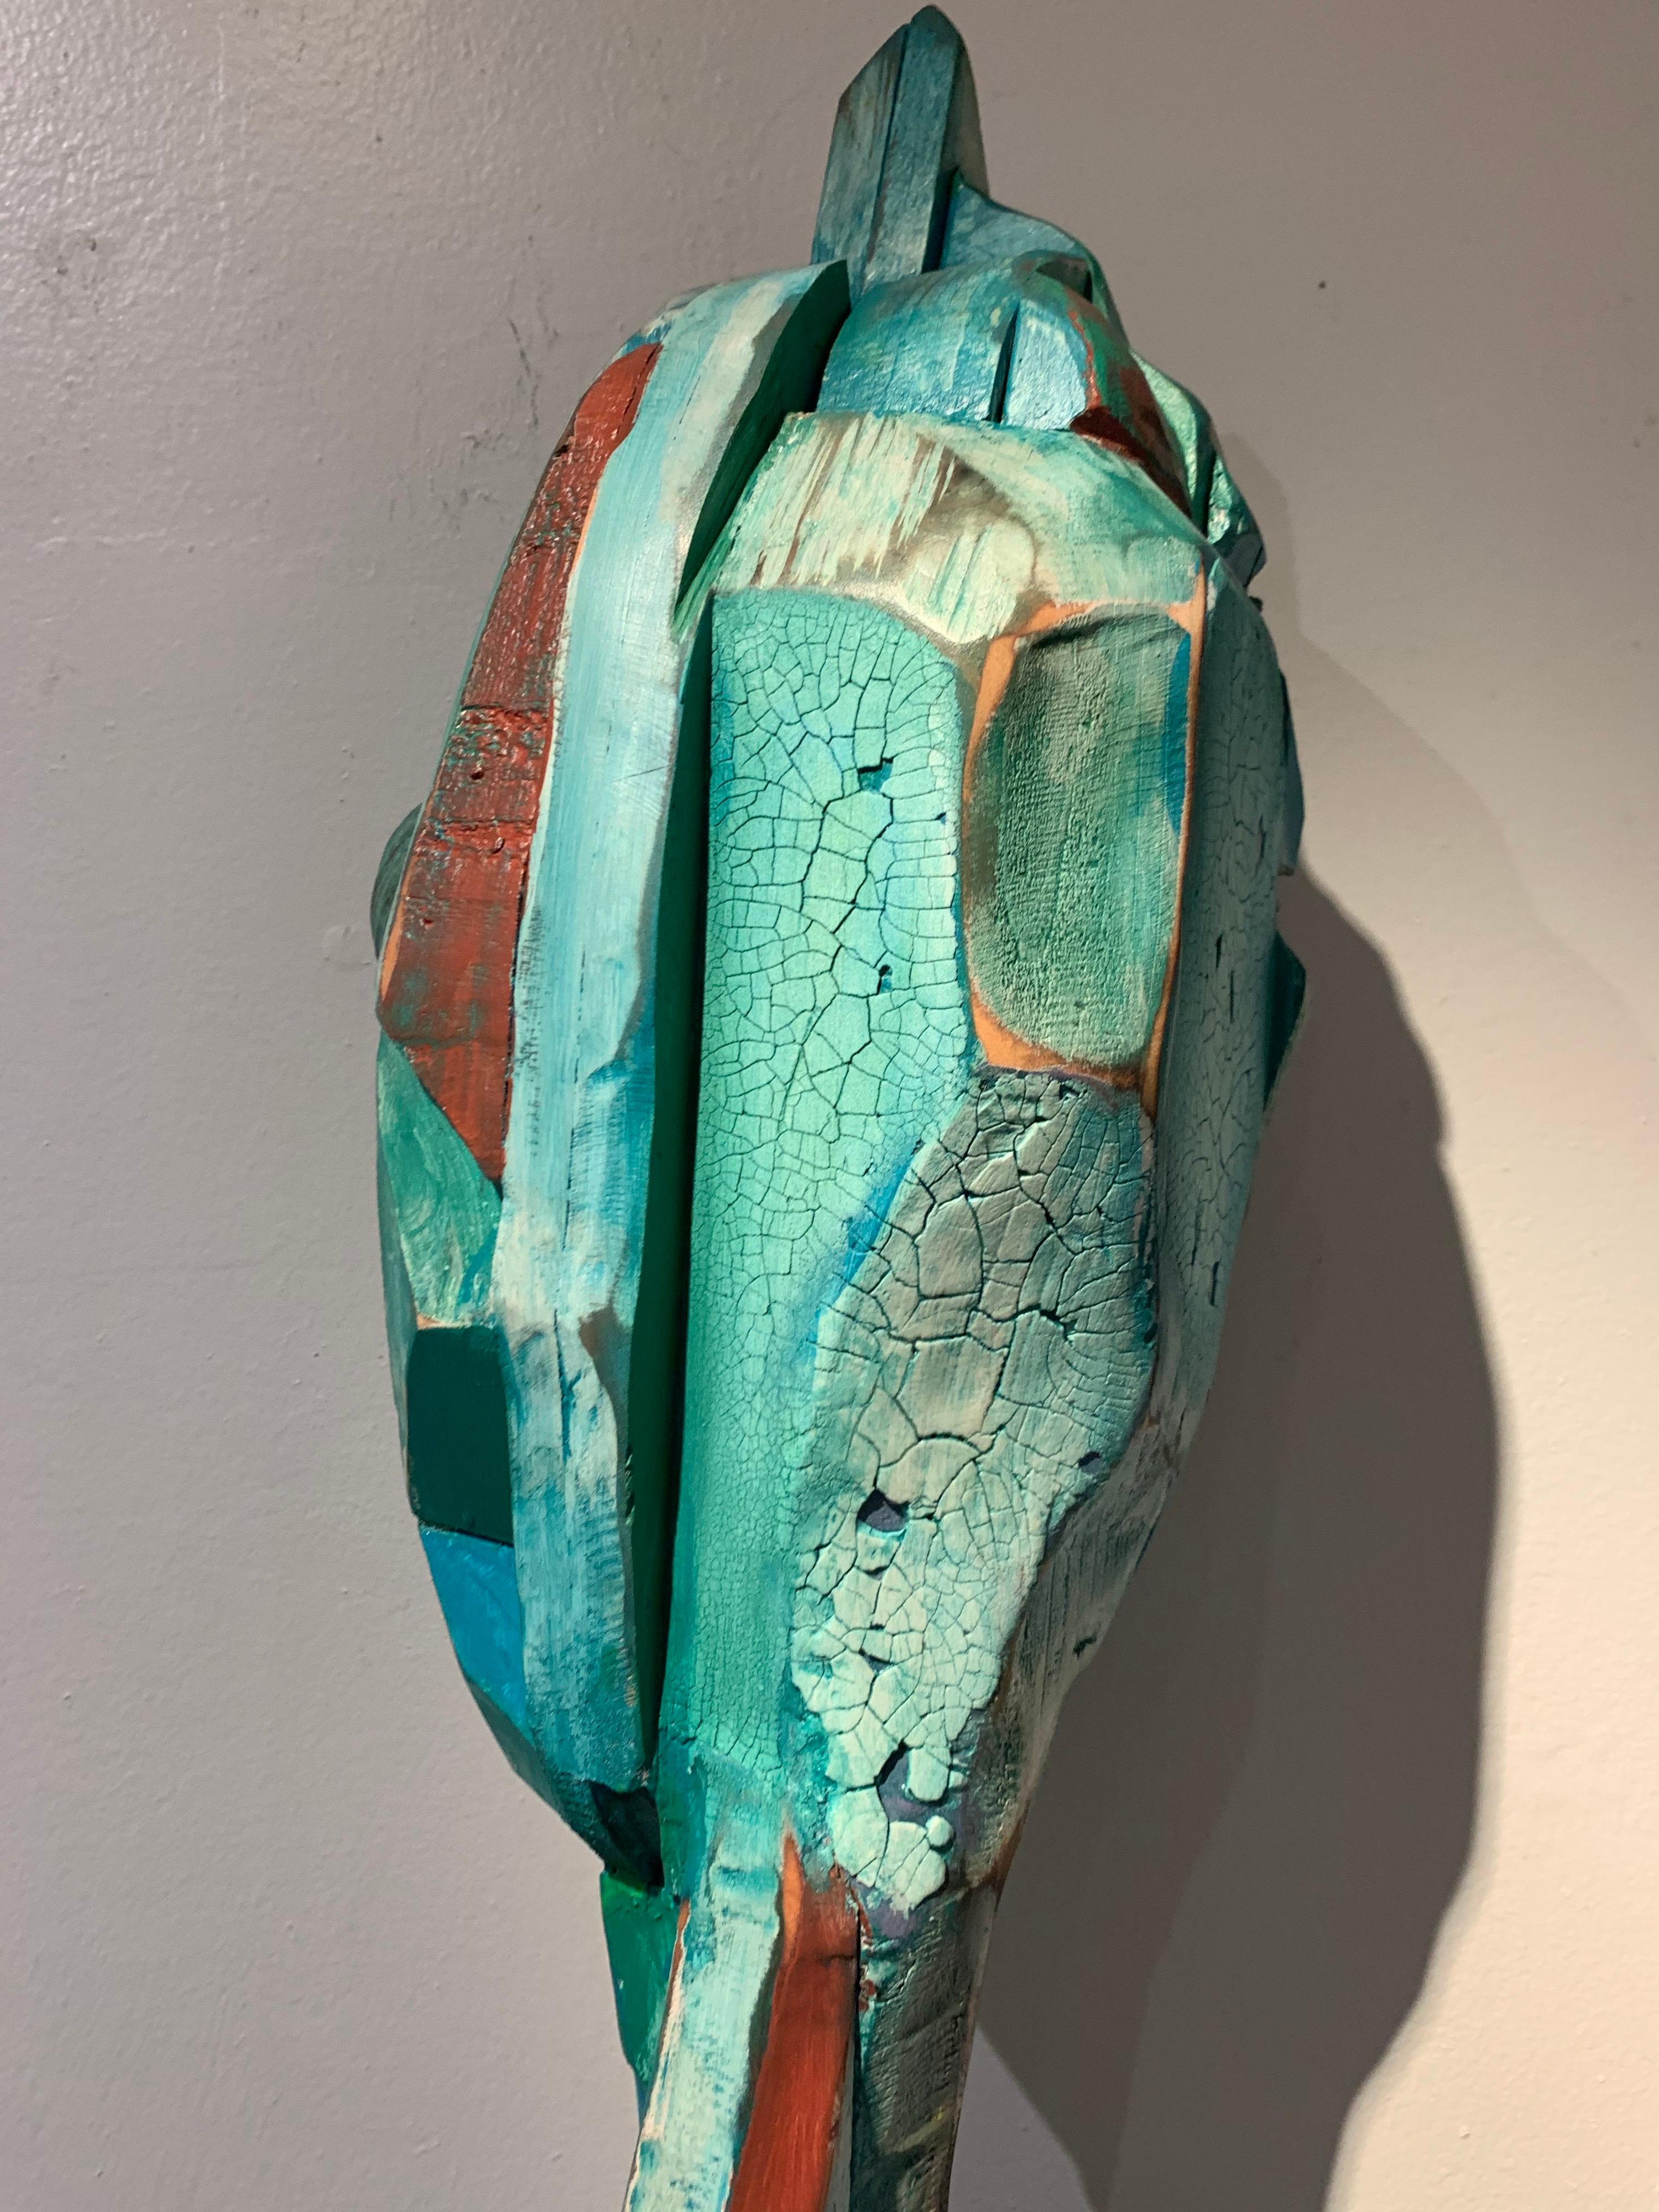 Listening, wood, acrylic, mixed media sculpture, green, blue, off white, brown - Brown Figurative Sculpture by Chris Reilly